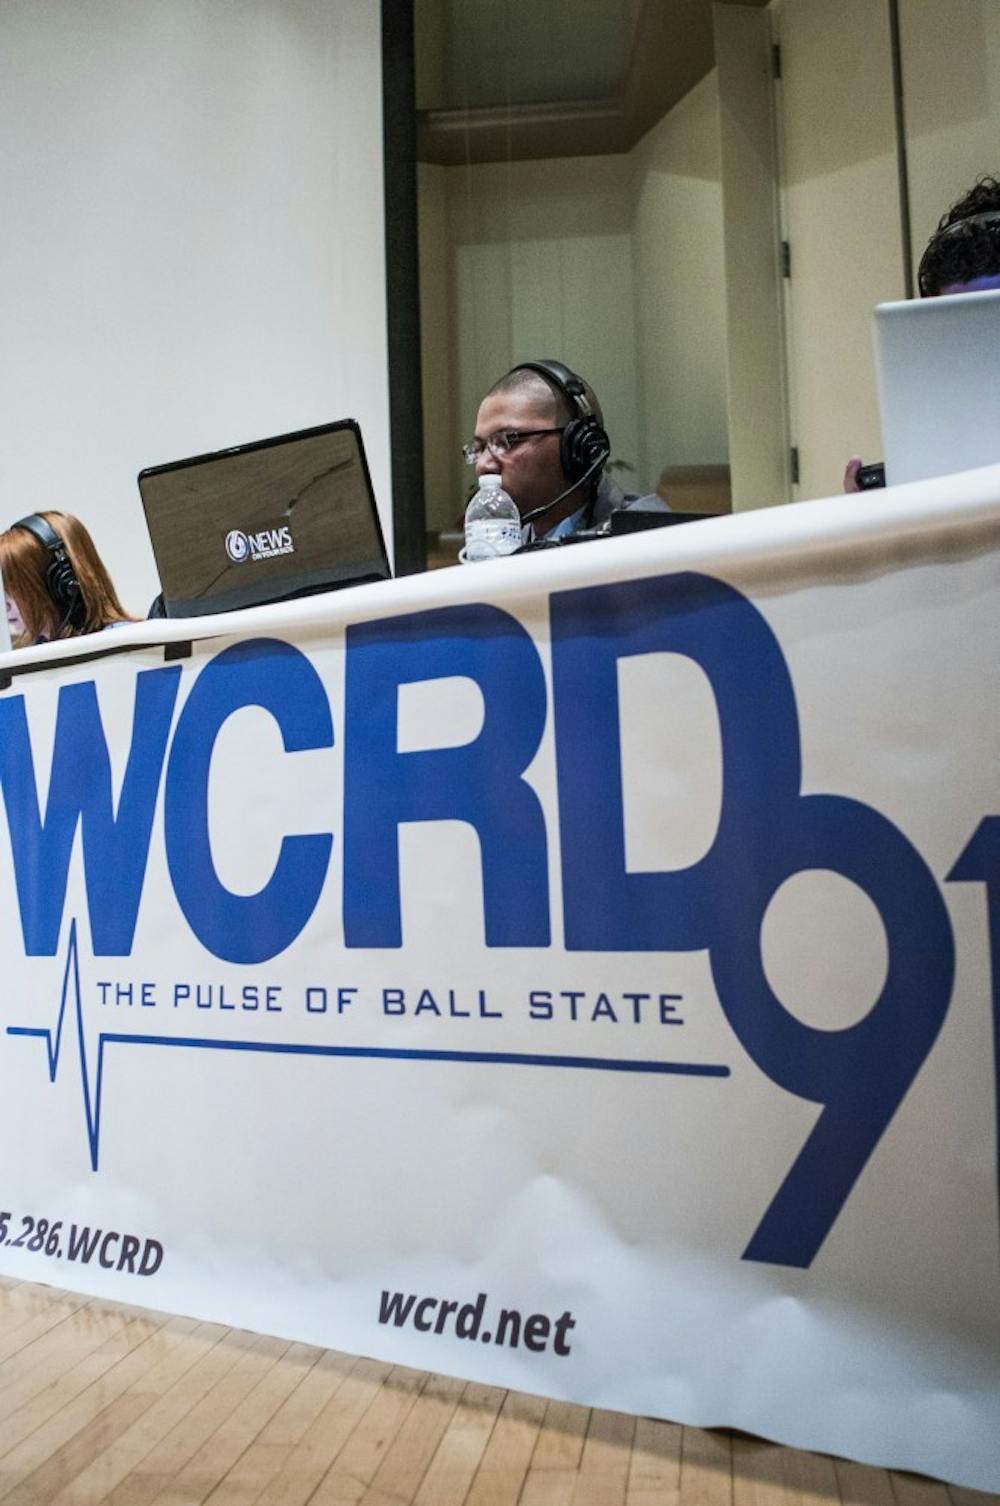 WCRD runs live coverage during one of the final Student Government Association debates Feb. 19 in Pruis Hall. WCRD celebrated its 25th anniversary this week. DN FILE PHOTO JONATHAN MIKSANEK